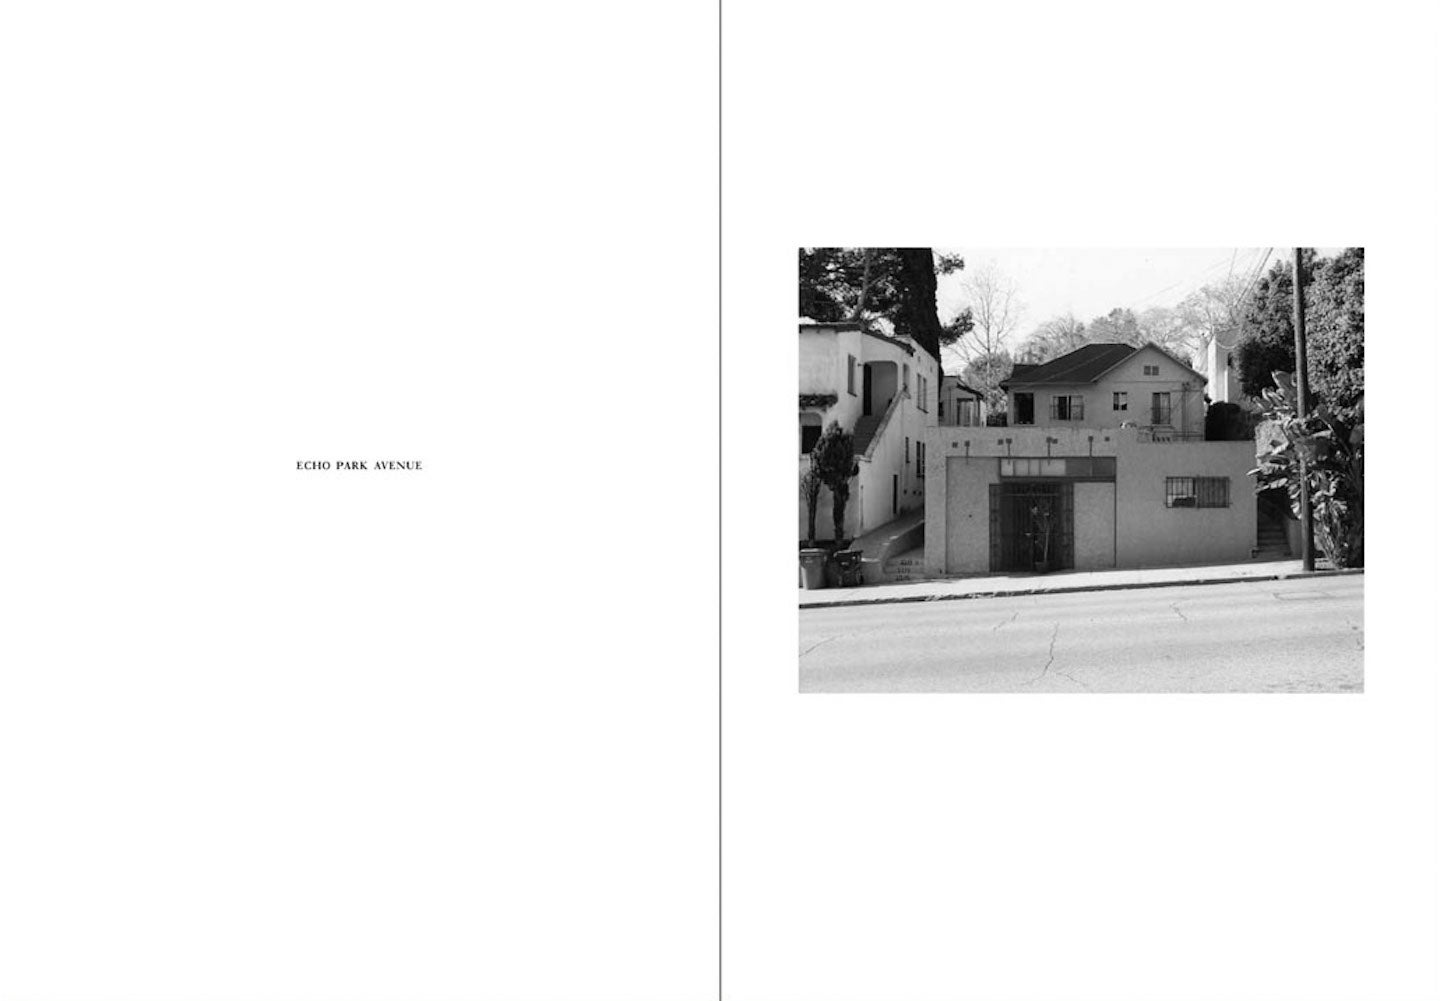 Nazraeli Press One Picture Book Two Series, Set 2: #5-8, Limited Edition(s) (with 4 Prints): Mark Ruwedel: Studio E.R. [Ed Ruscha]; Jo Ann Callis: Cheap Thrills; Mike Mulno: Residential Variations; Jan Banning: The Sweating Subject